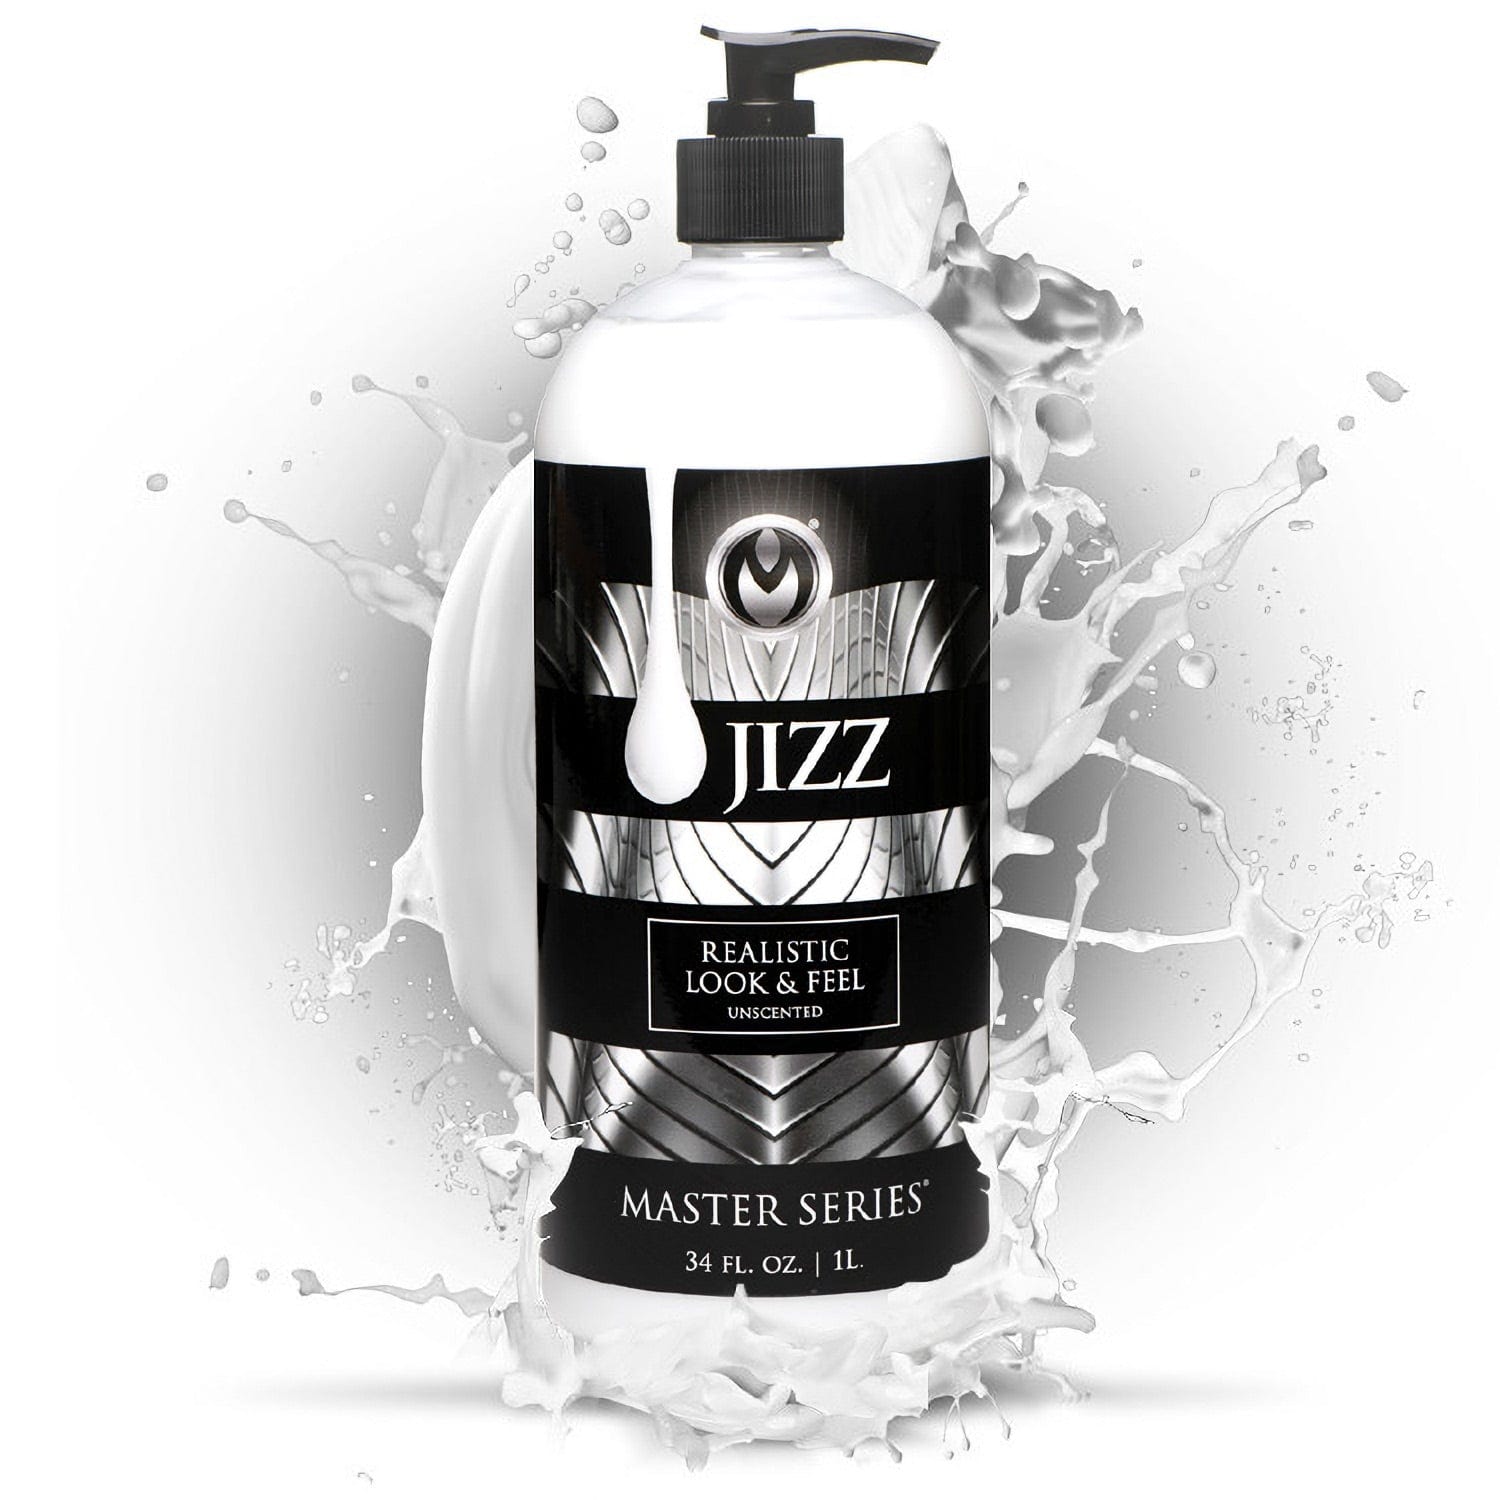 Master Series Water Based Lubricant 34 oz. Master Series Jizz Unscented Water-Based Lube at the Haus of Shag